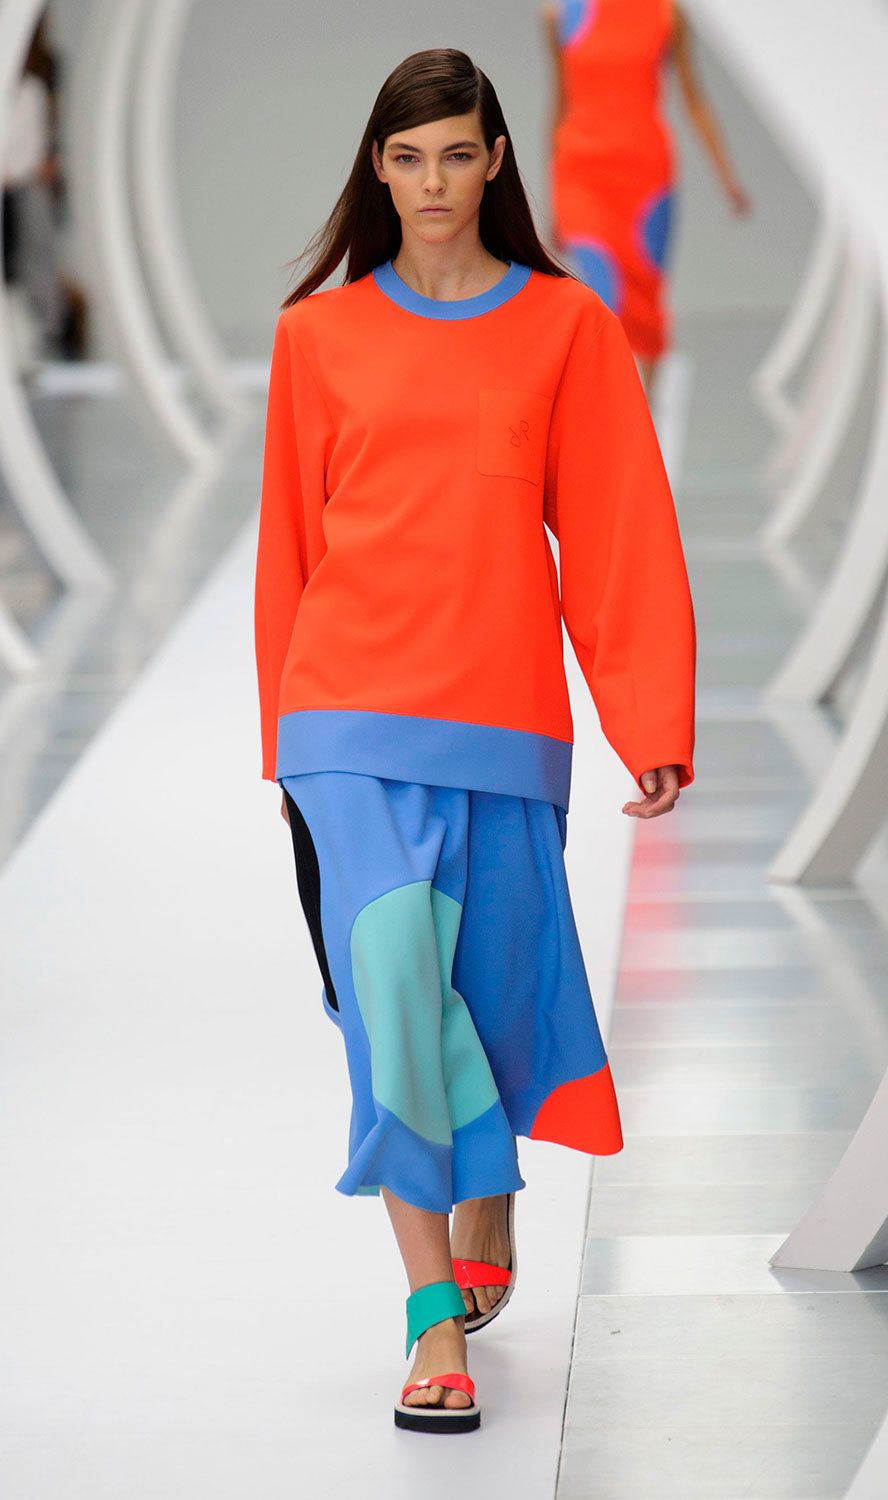 Blue, Sleeve, Shoulder, Textile, Joint, Red, Human leg, Fashion show, Style, Electric blue, 